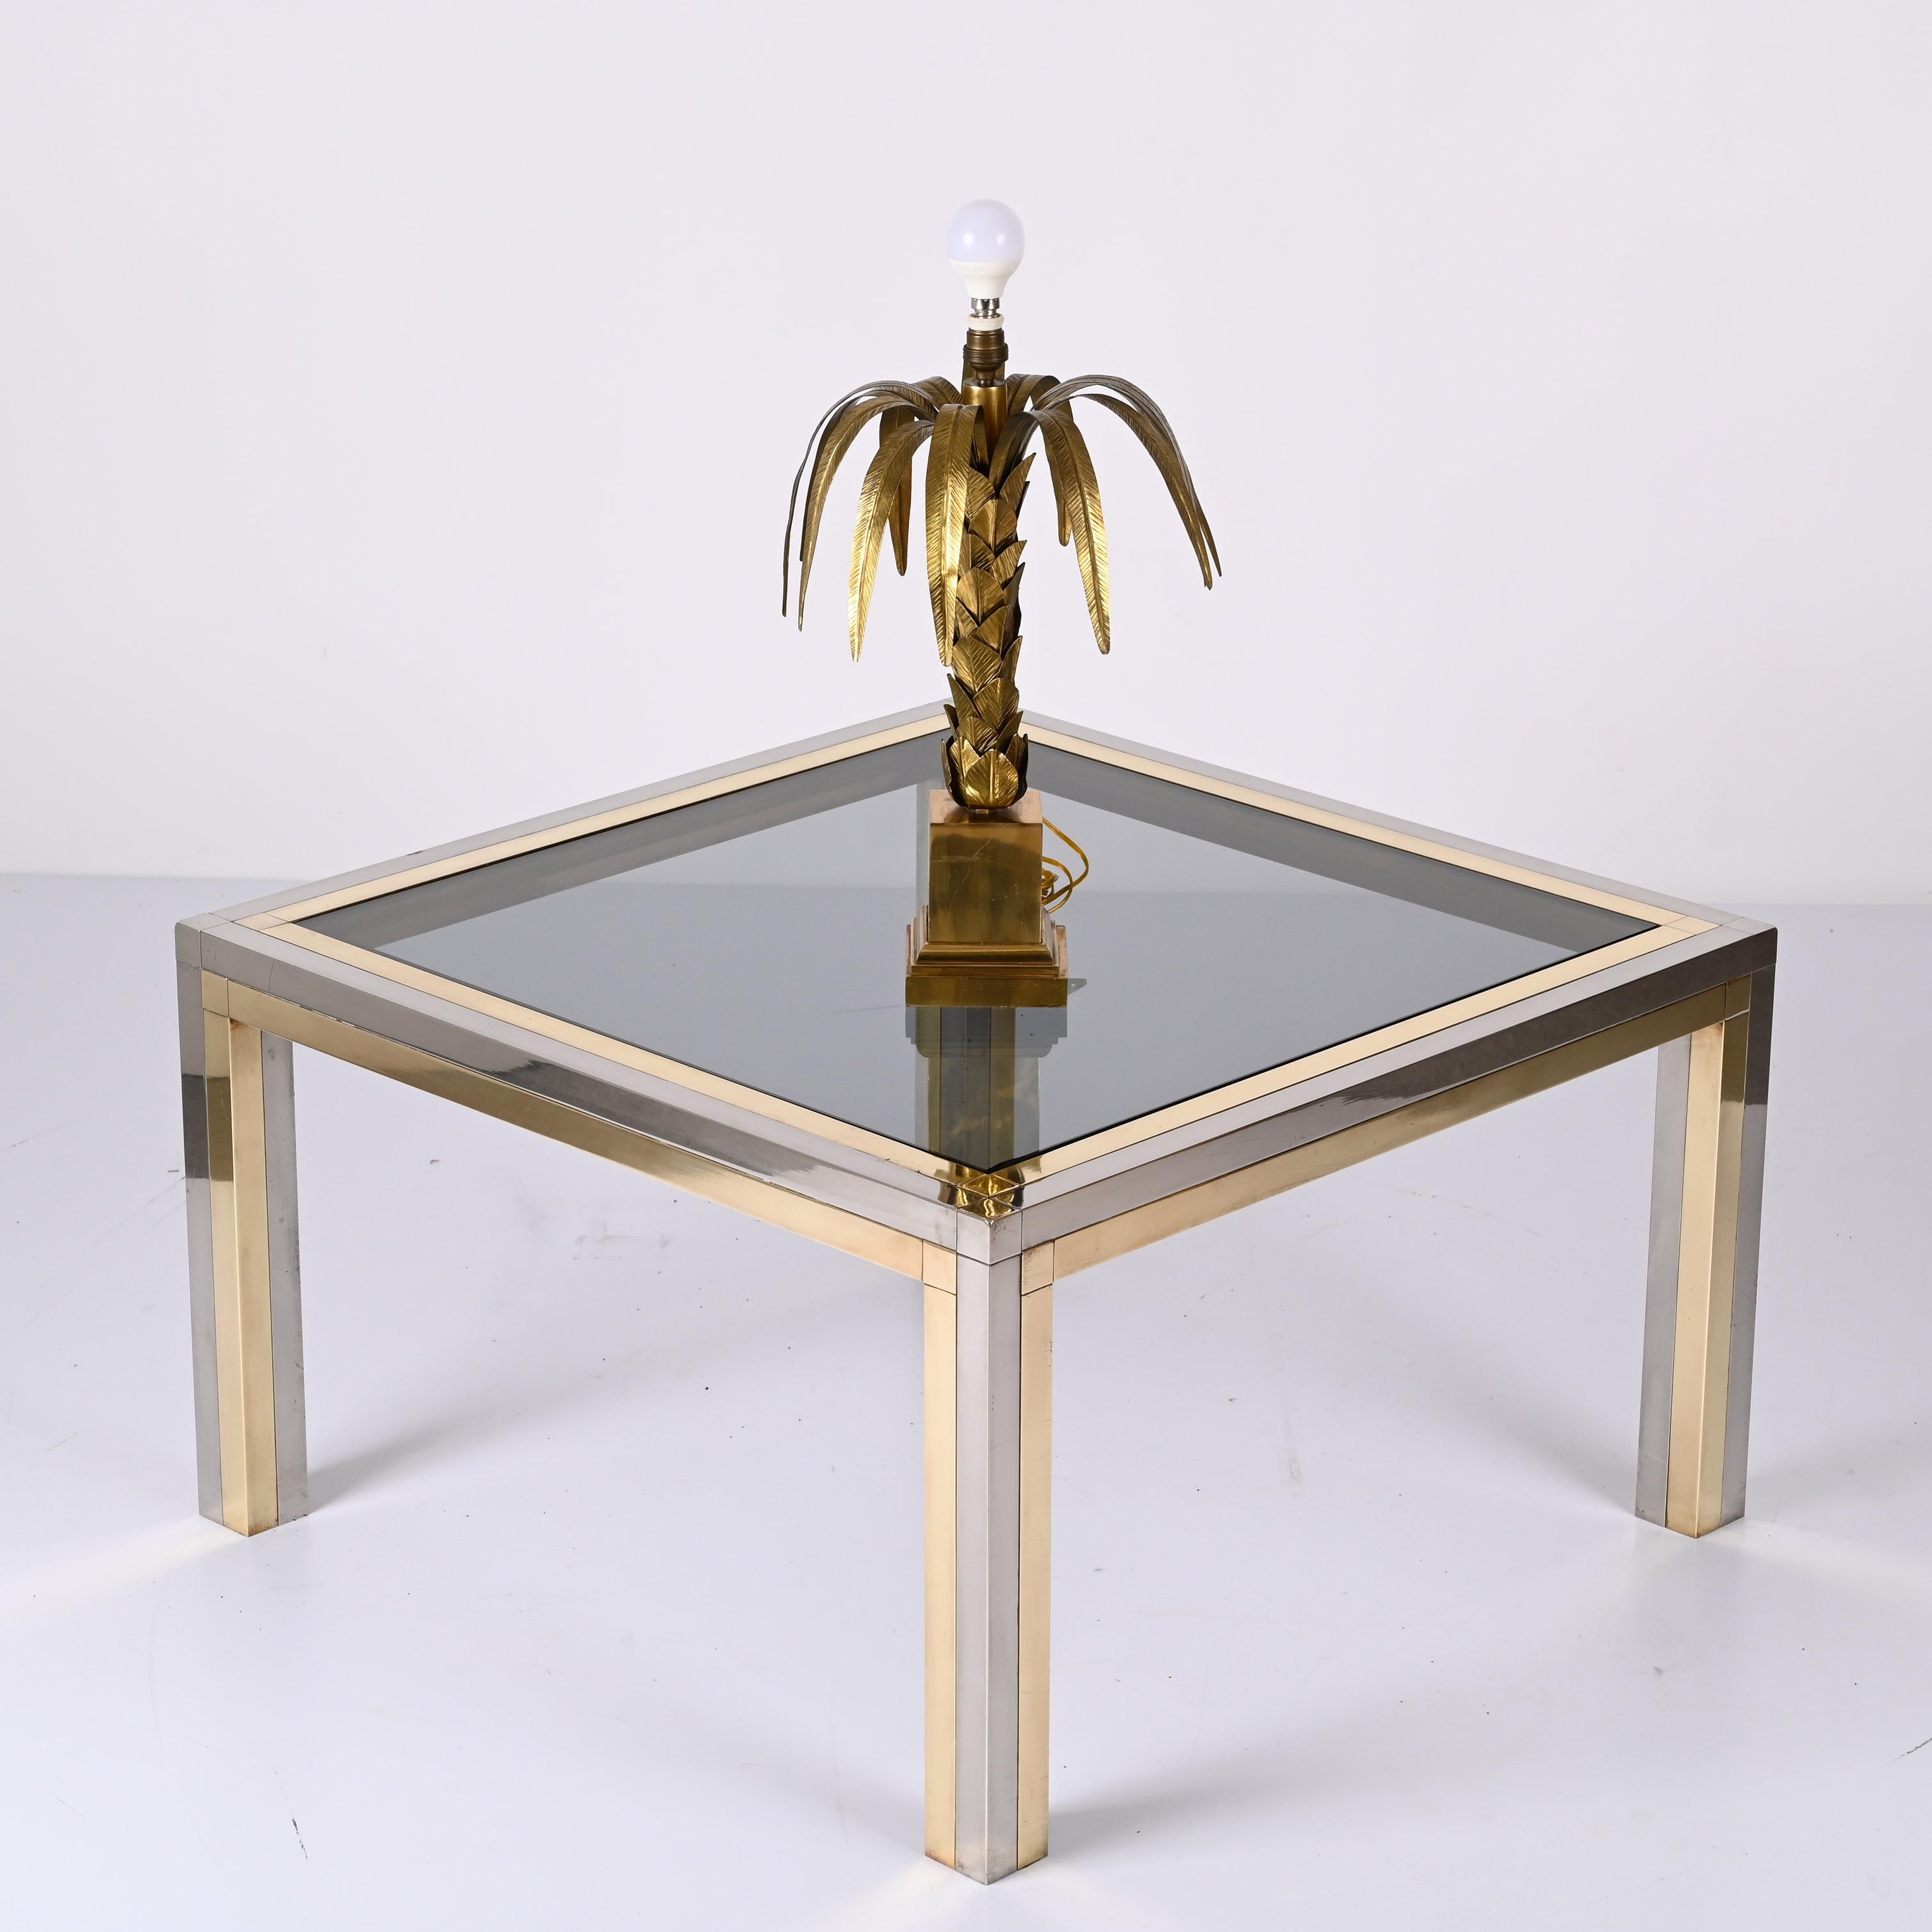 Romeo Rega Brass, Chrome and Smoked Glass Square Italian Coffee Table, 1970s For Sale 5